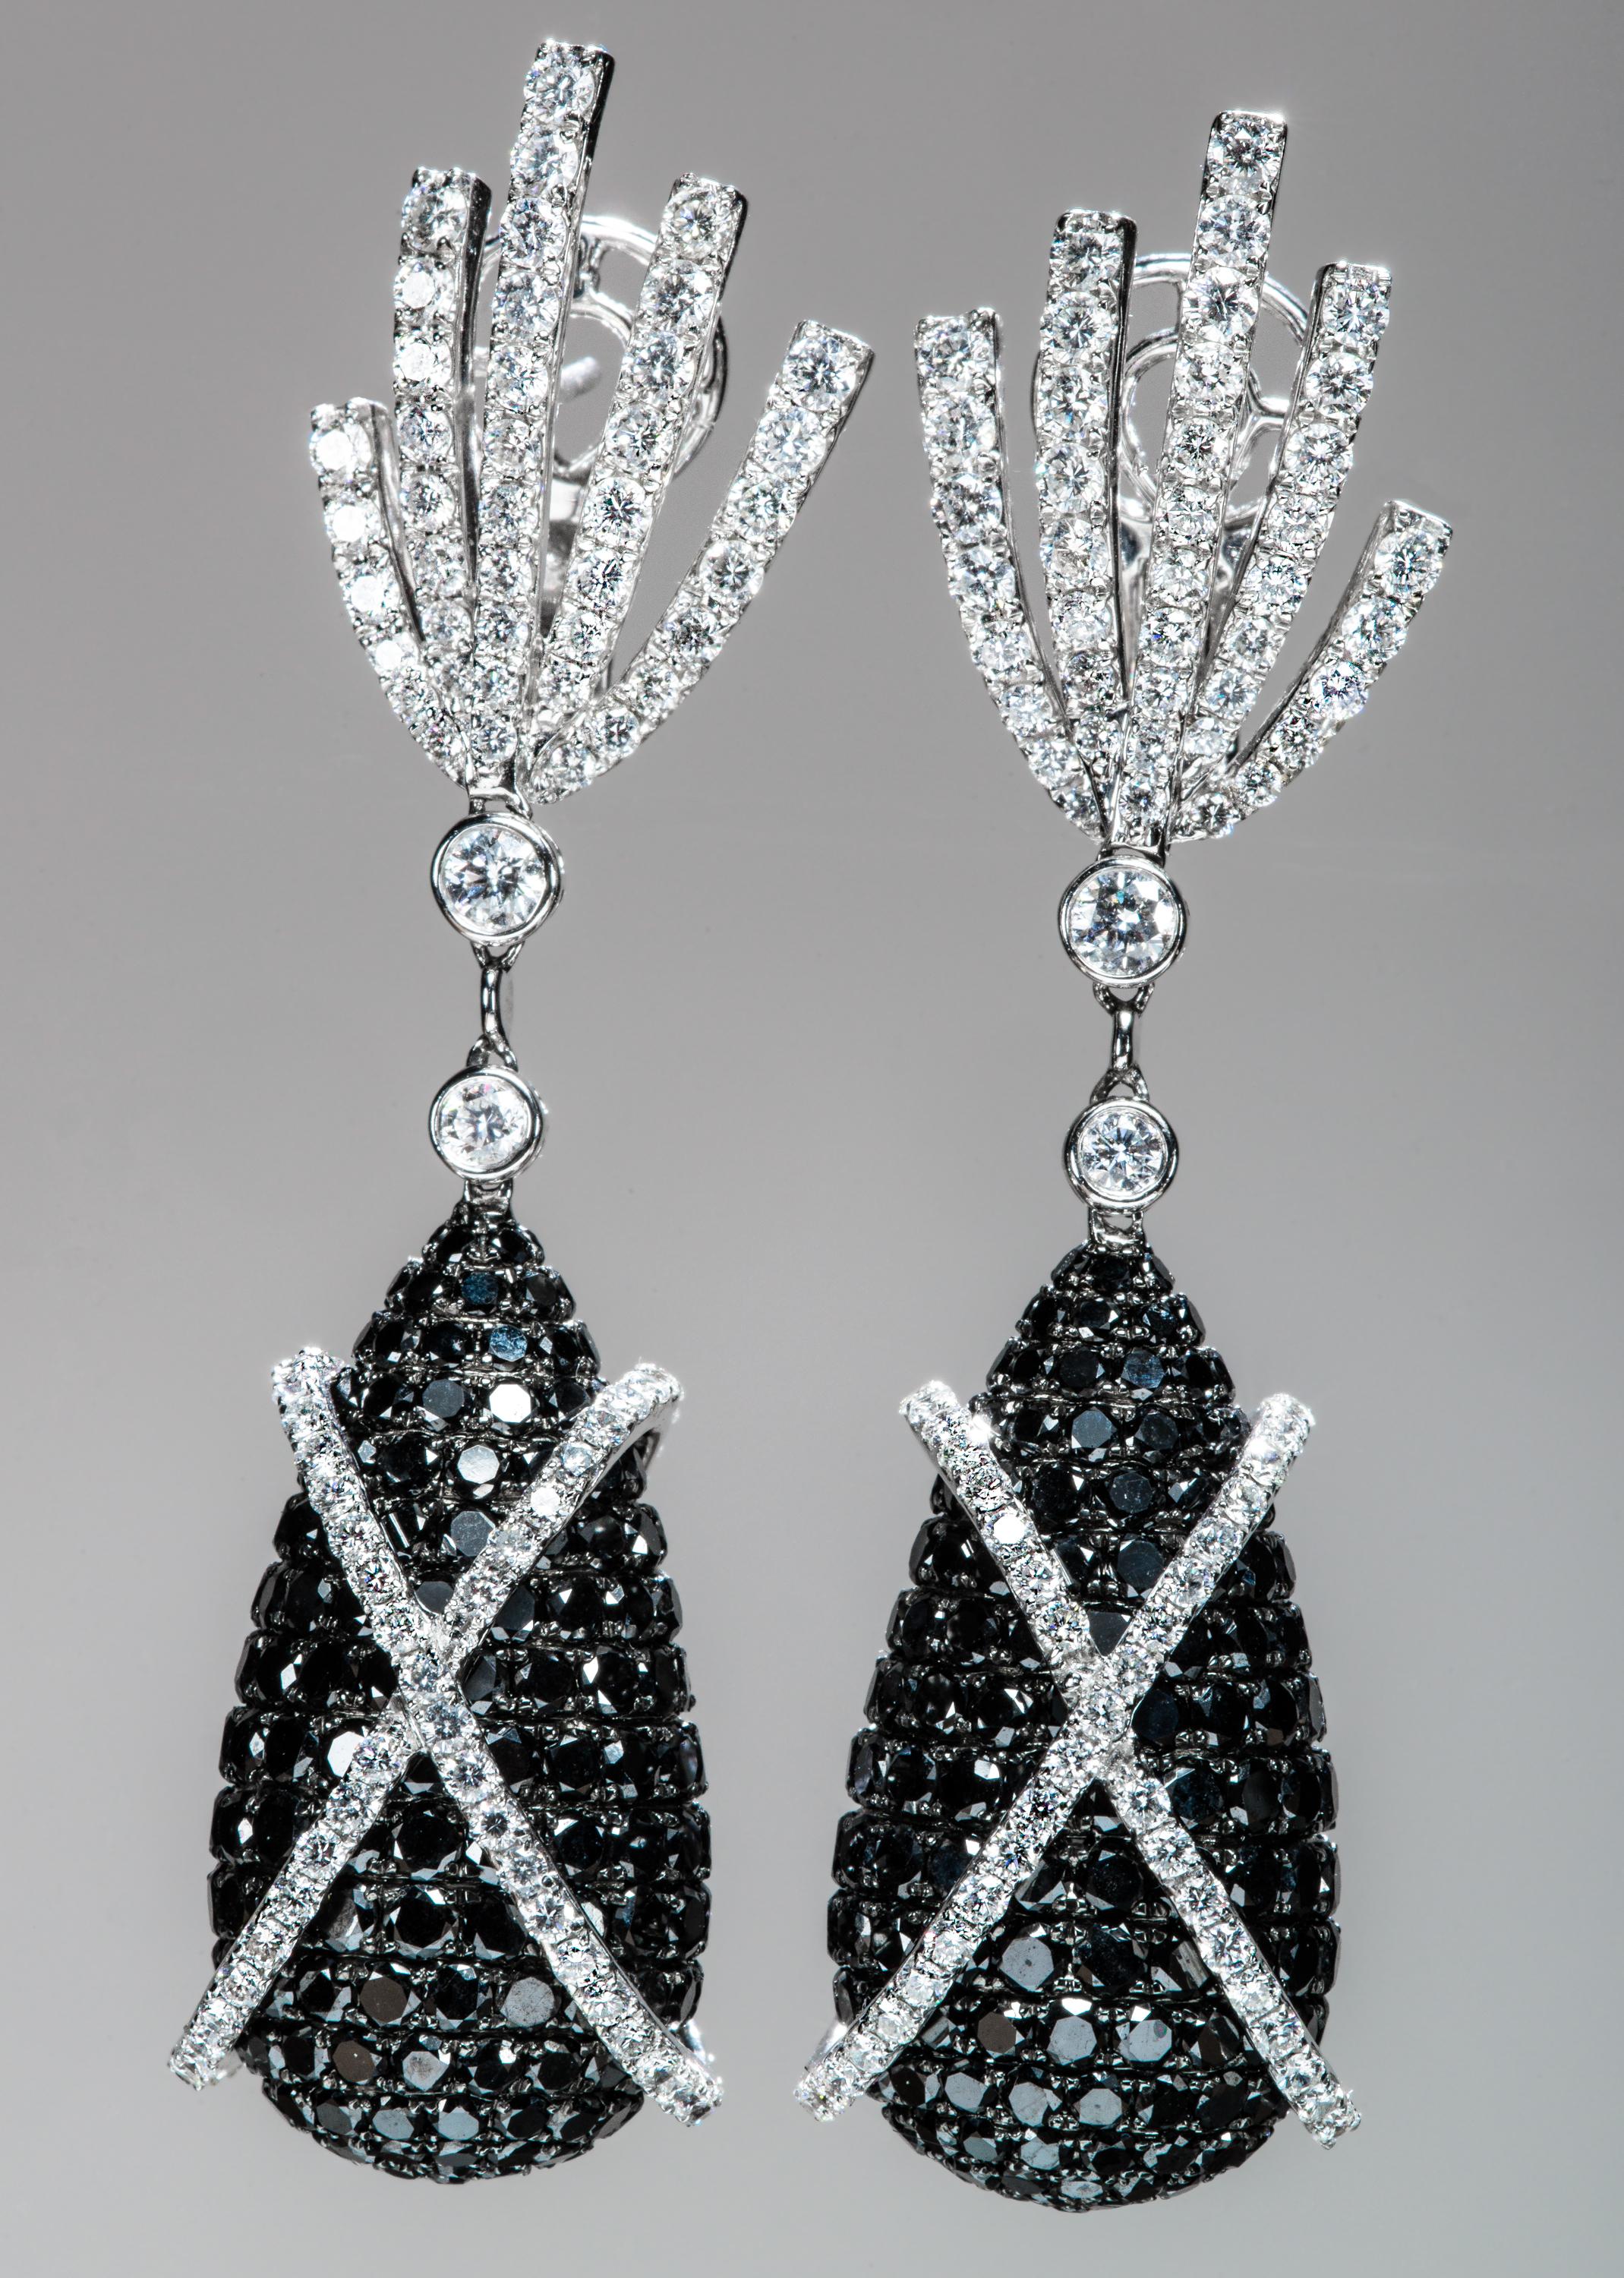 Black Diamond and Diamond Earrings In Excellent Condition For Sale In Weston, MA